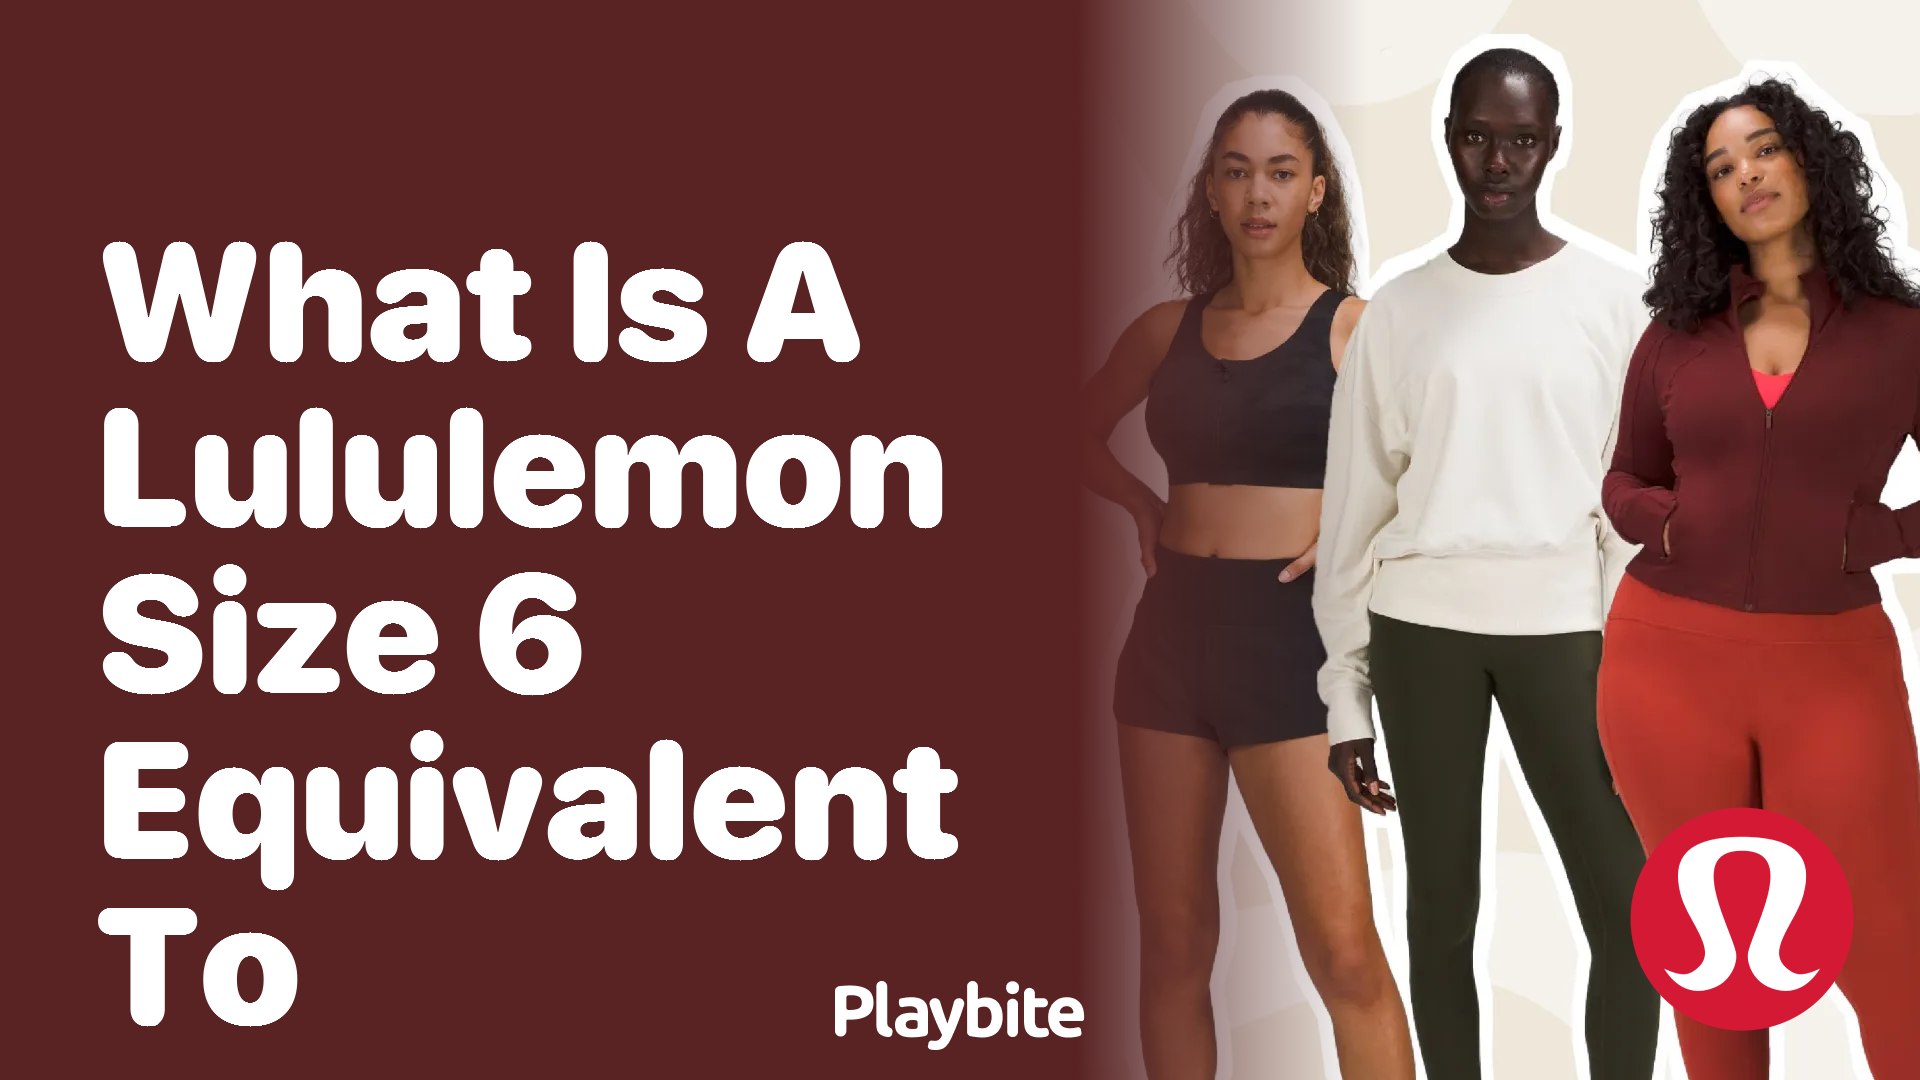 What is a Lululemon Size 6 Equivalent To? - Playbite